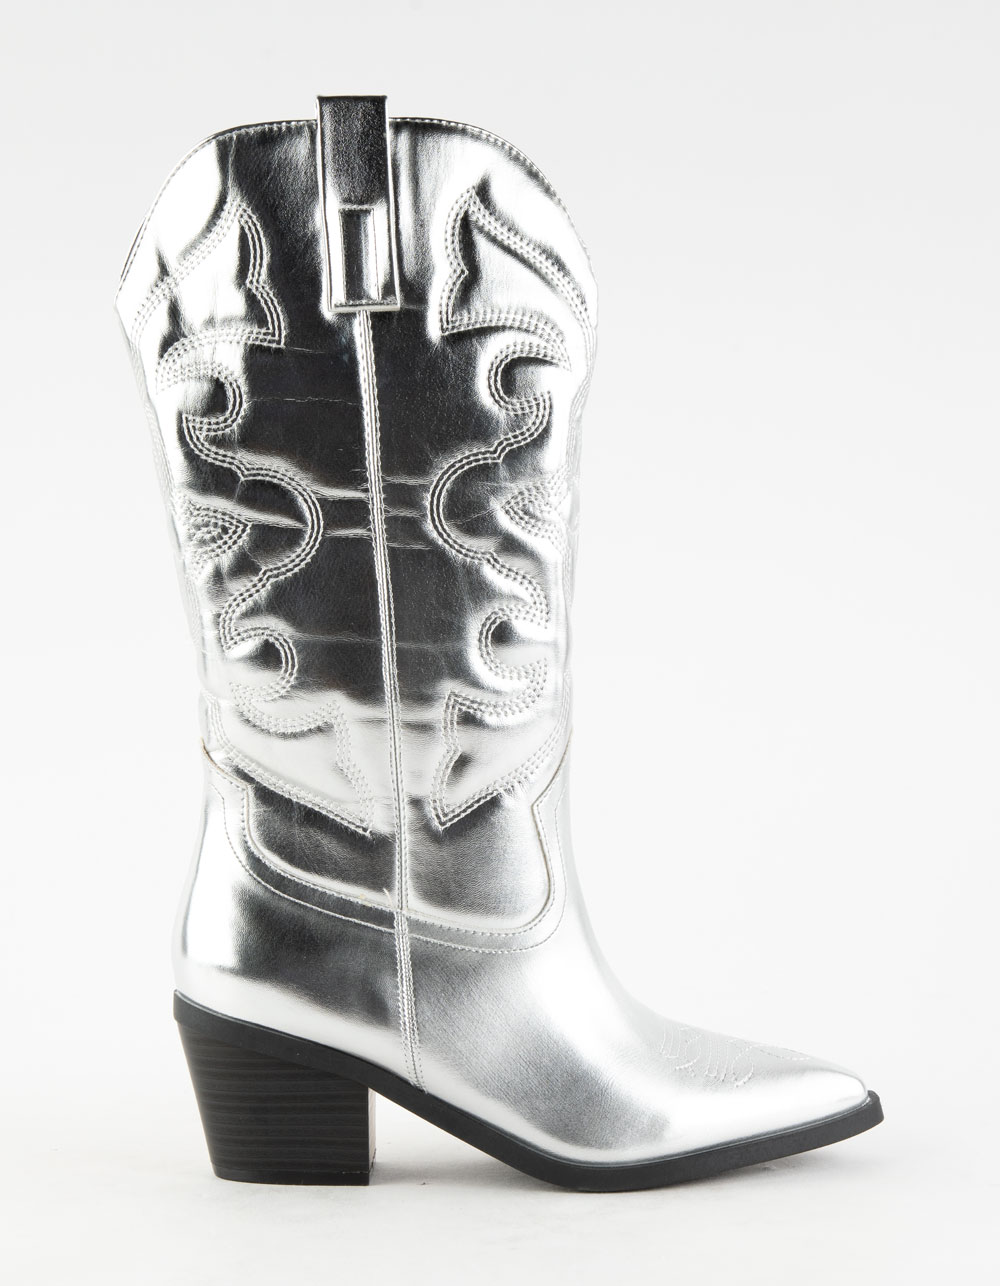 BAMBOO Mindful Tall Western Womens Boots - SILVER | Tillys